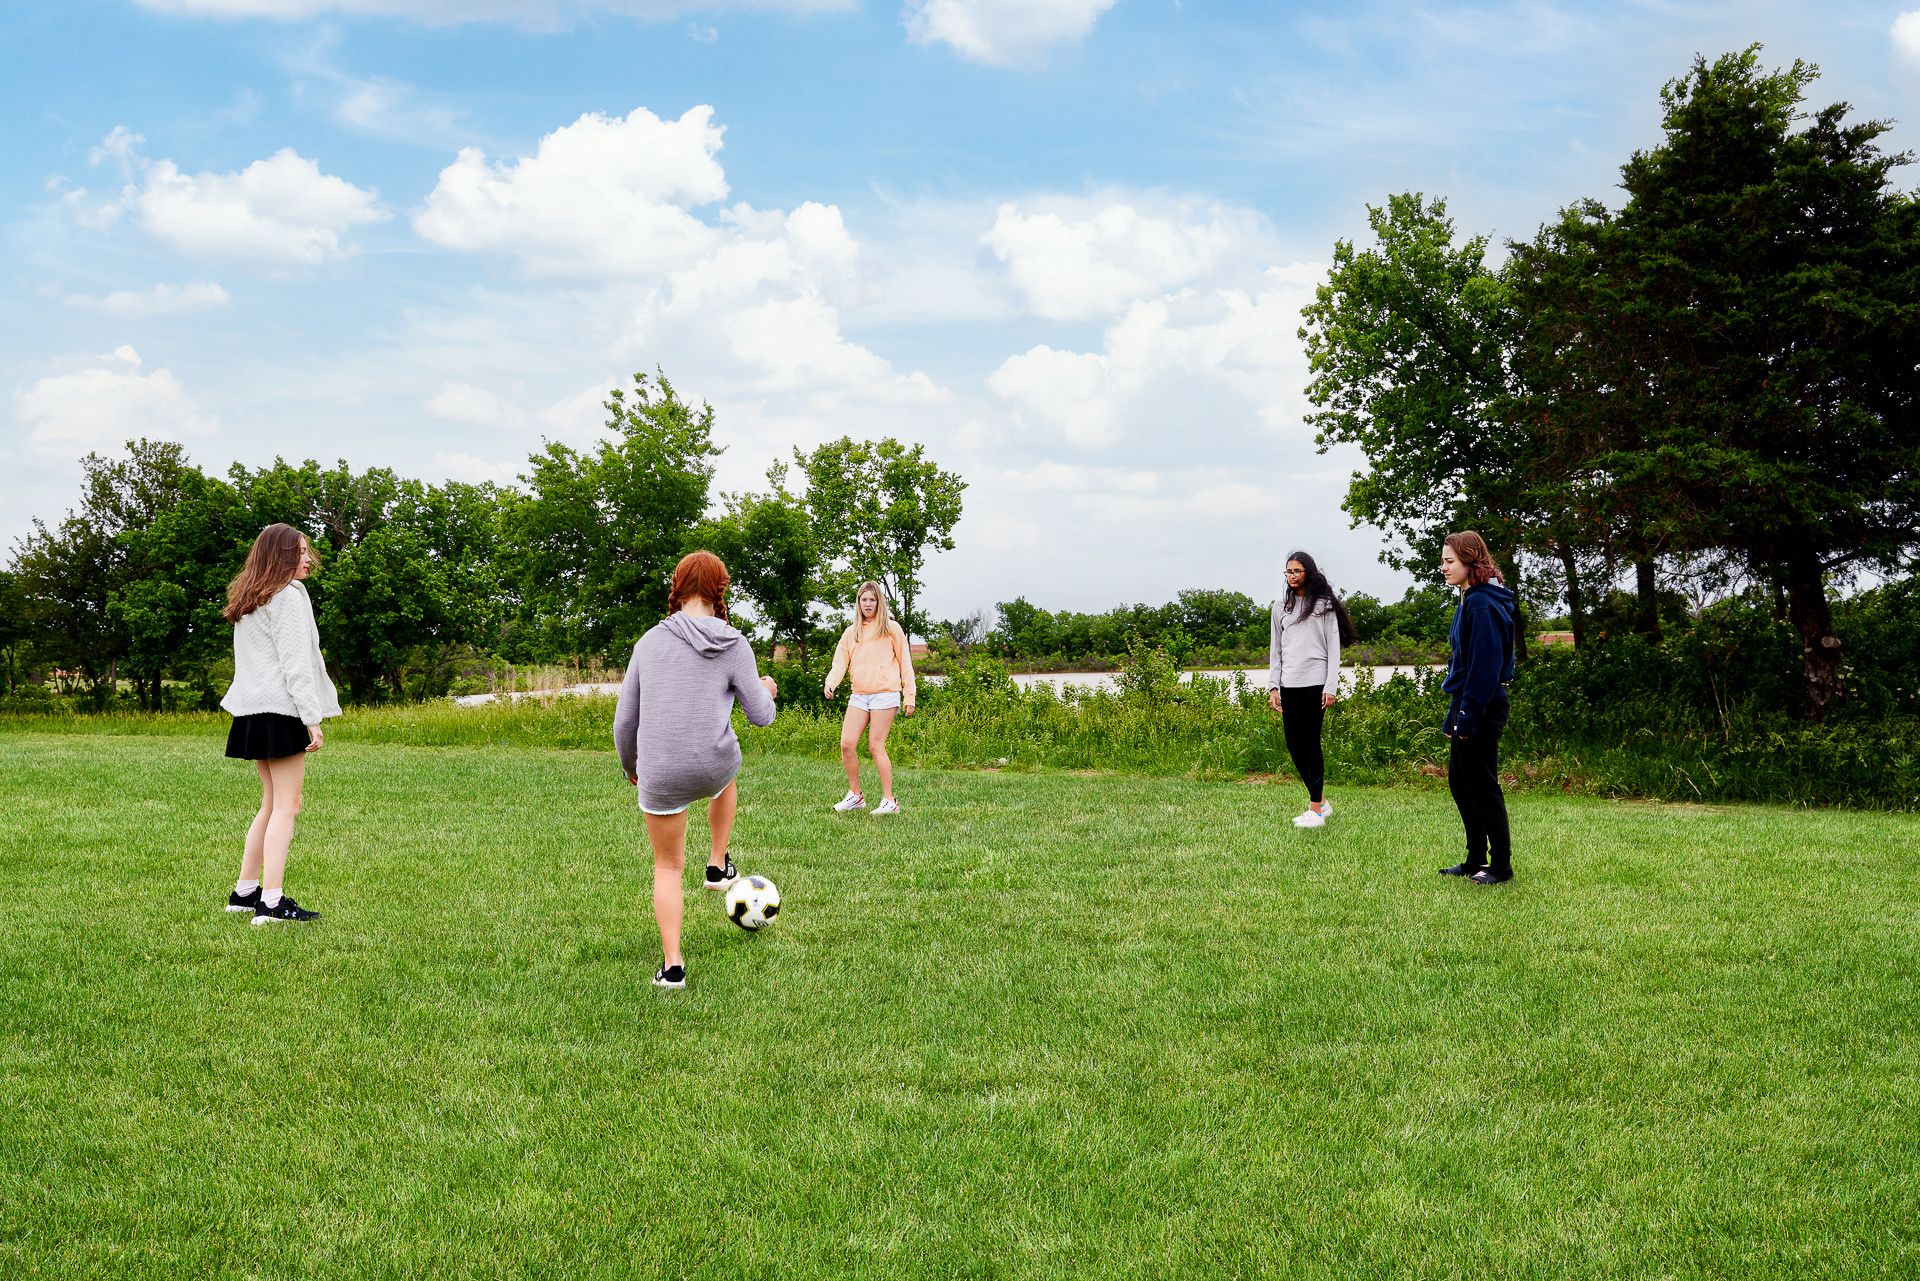 Soccer in green space at new community in Moore, OK:Green Space & Pond